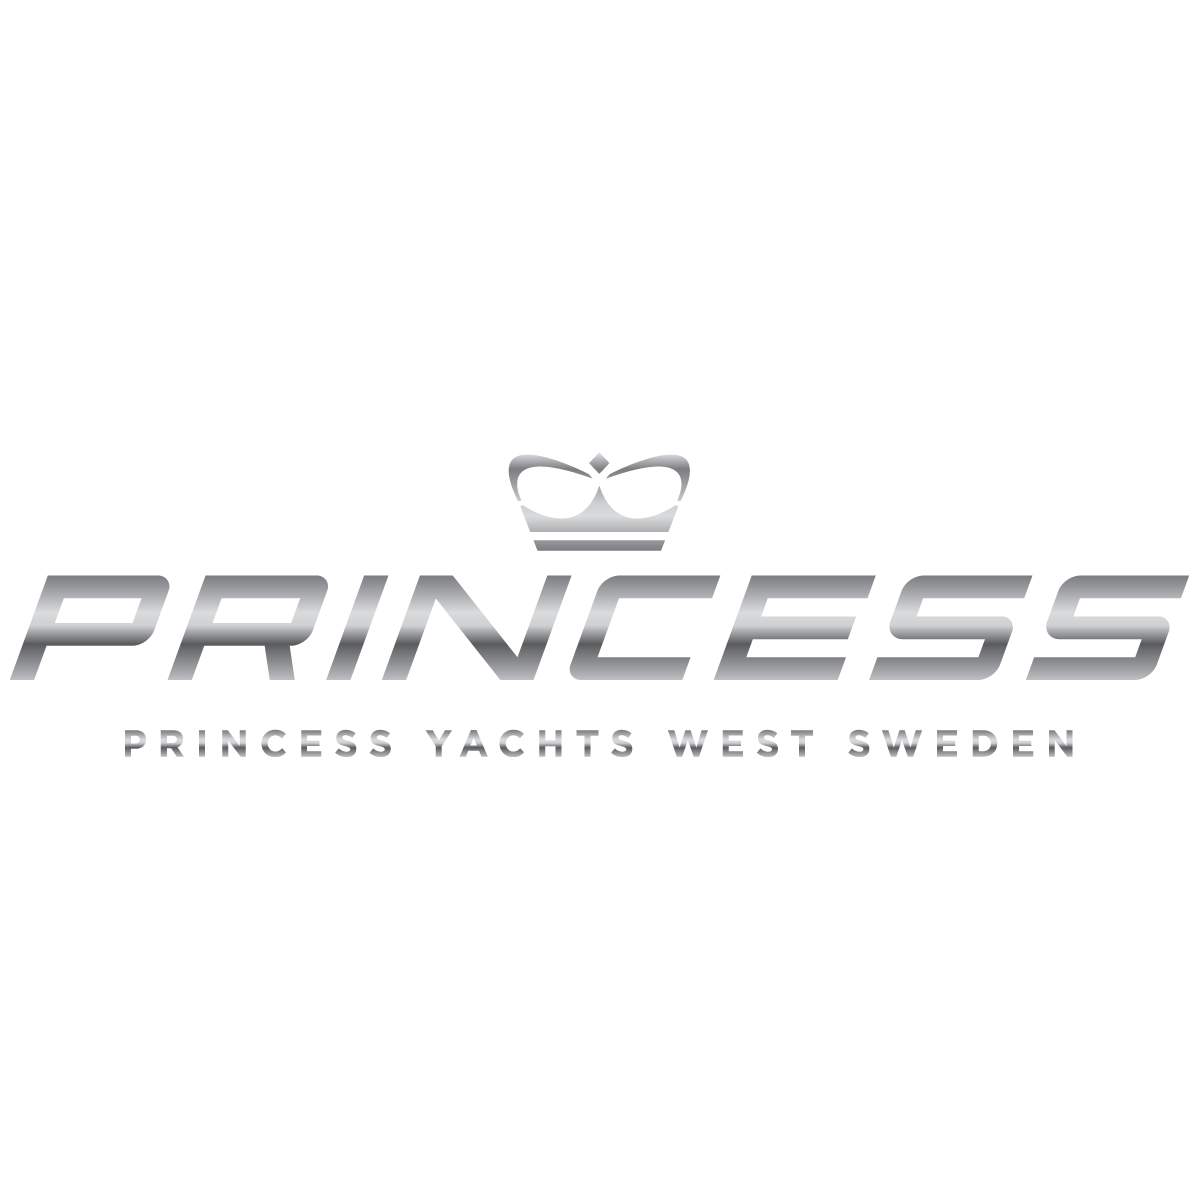 New Distributor for Princess Yachts in western Sweden